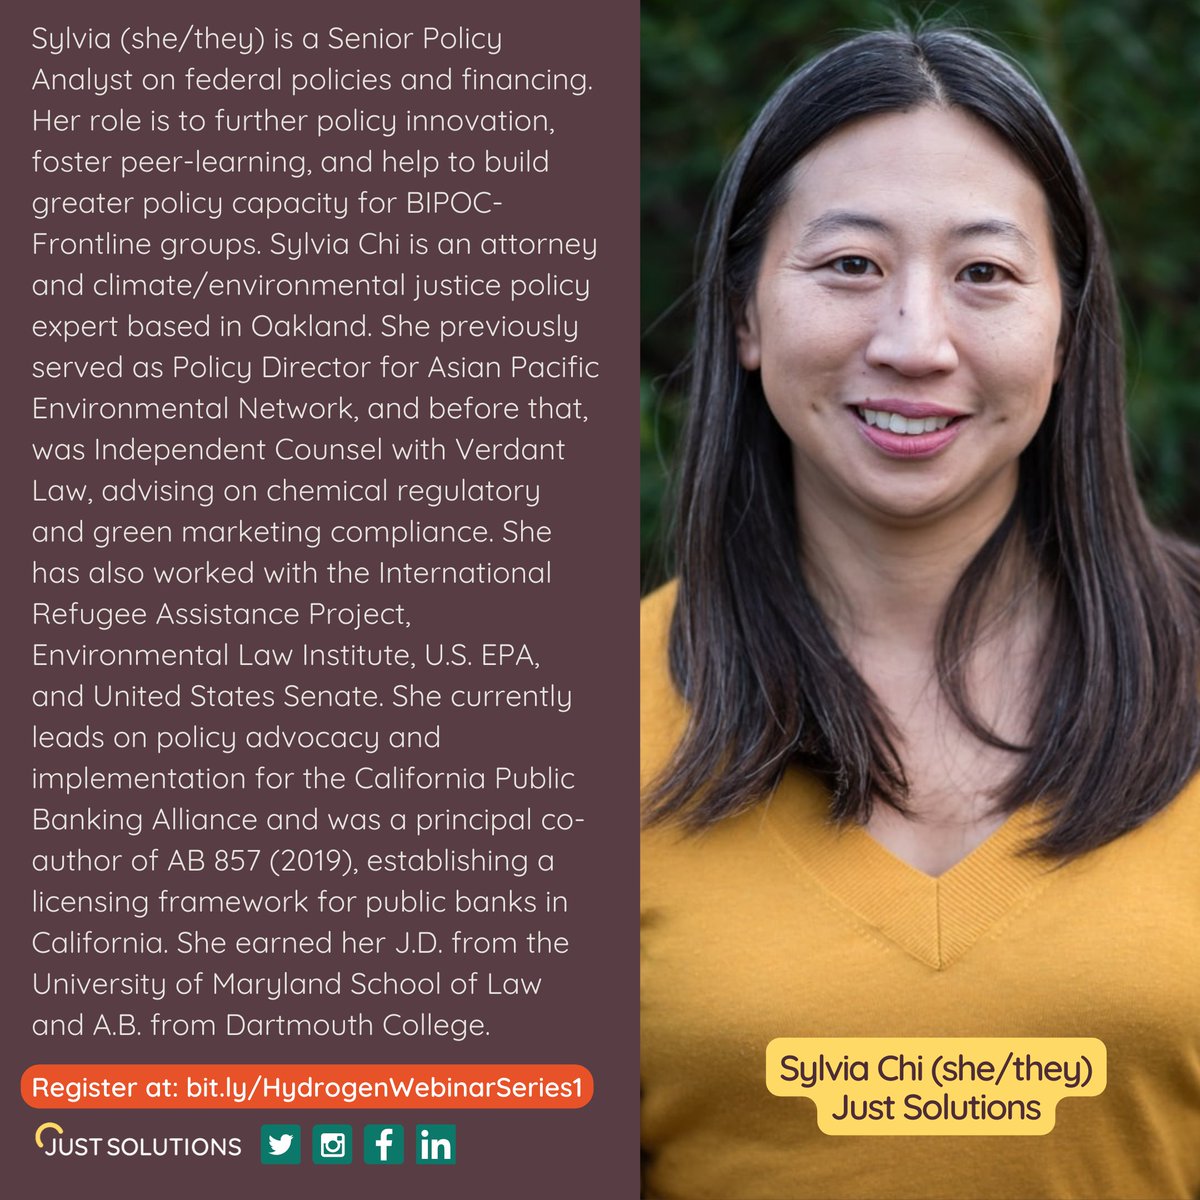 @CBECal Meet the panelists: Sylvia Chi, Senior Policy Analyst at @Just_Solutions_ #HydrogenEJFramework